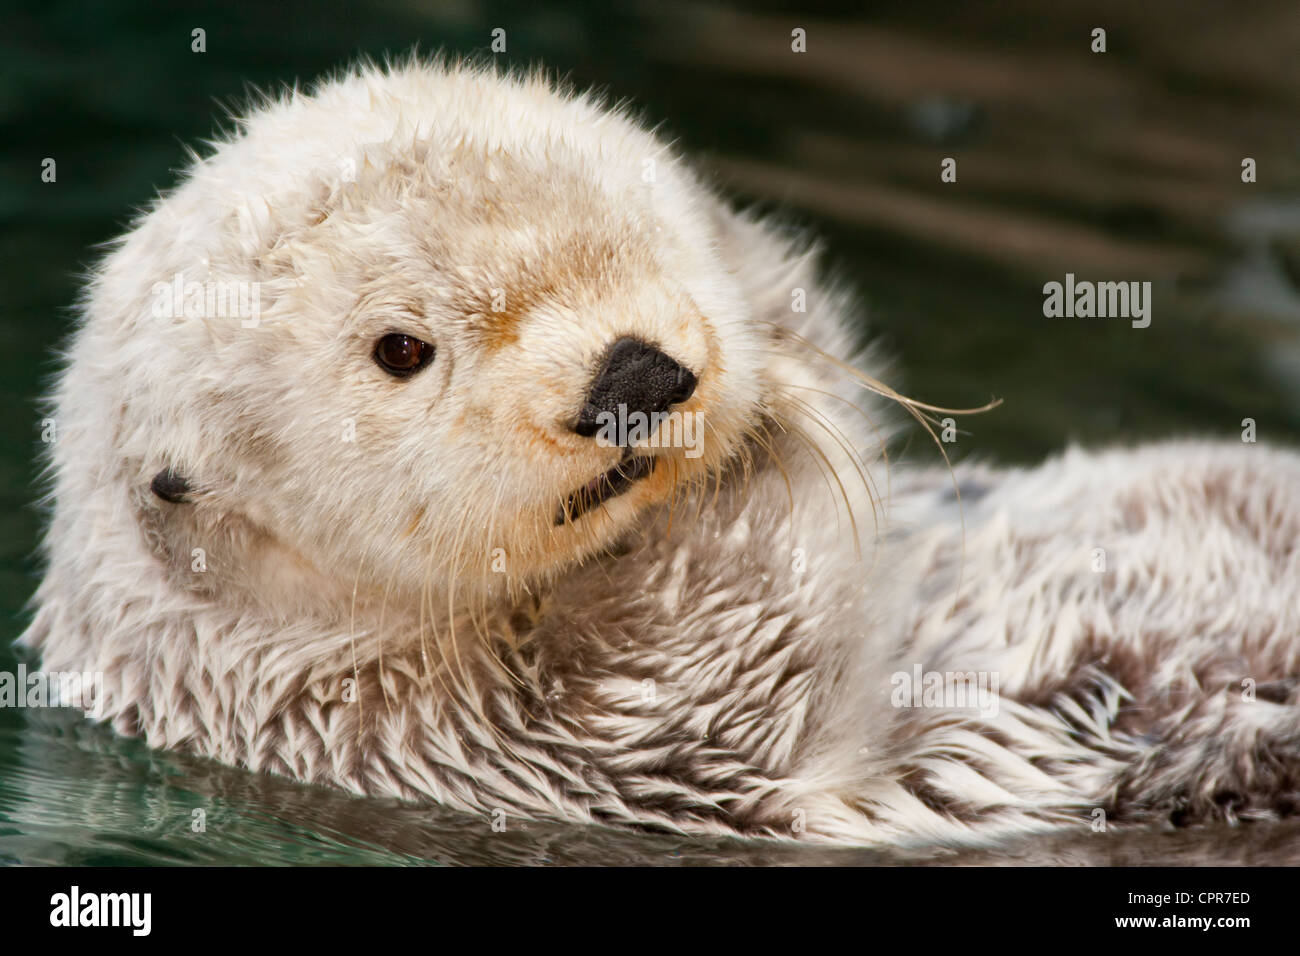 Sea otter playing in aquarium pool-Note-Captive subject. Stock Photo